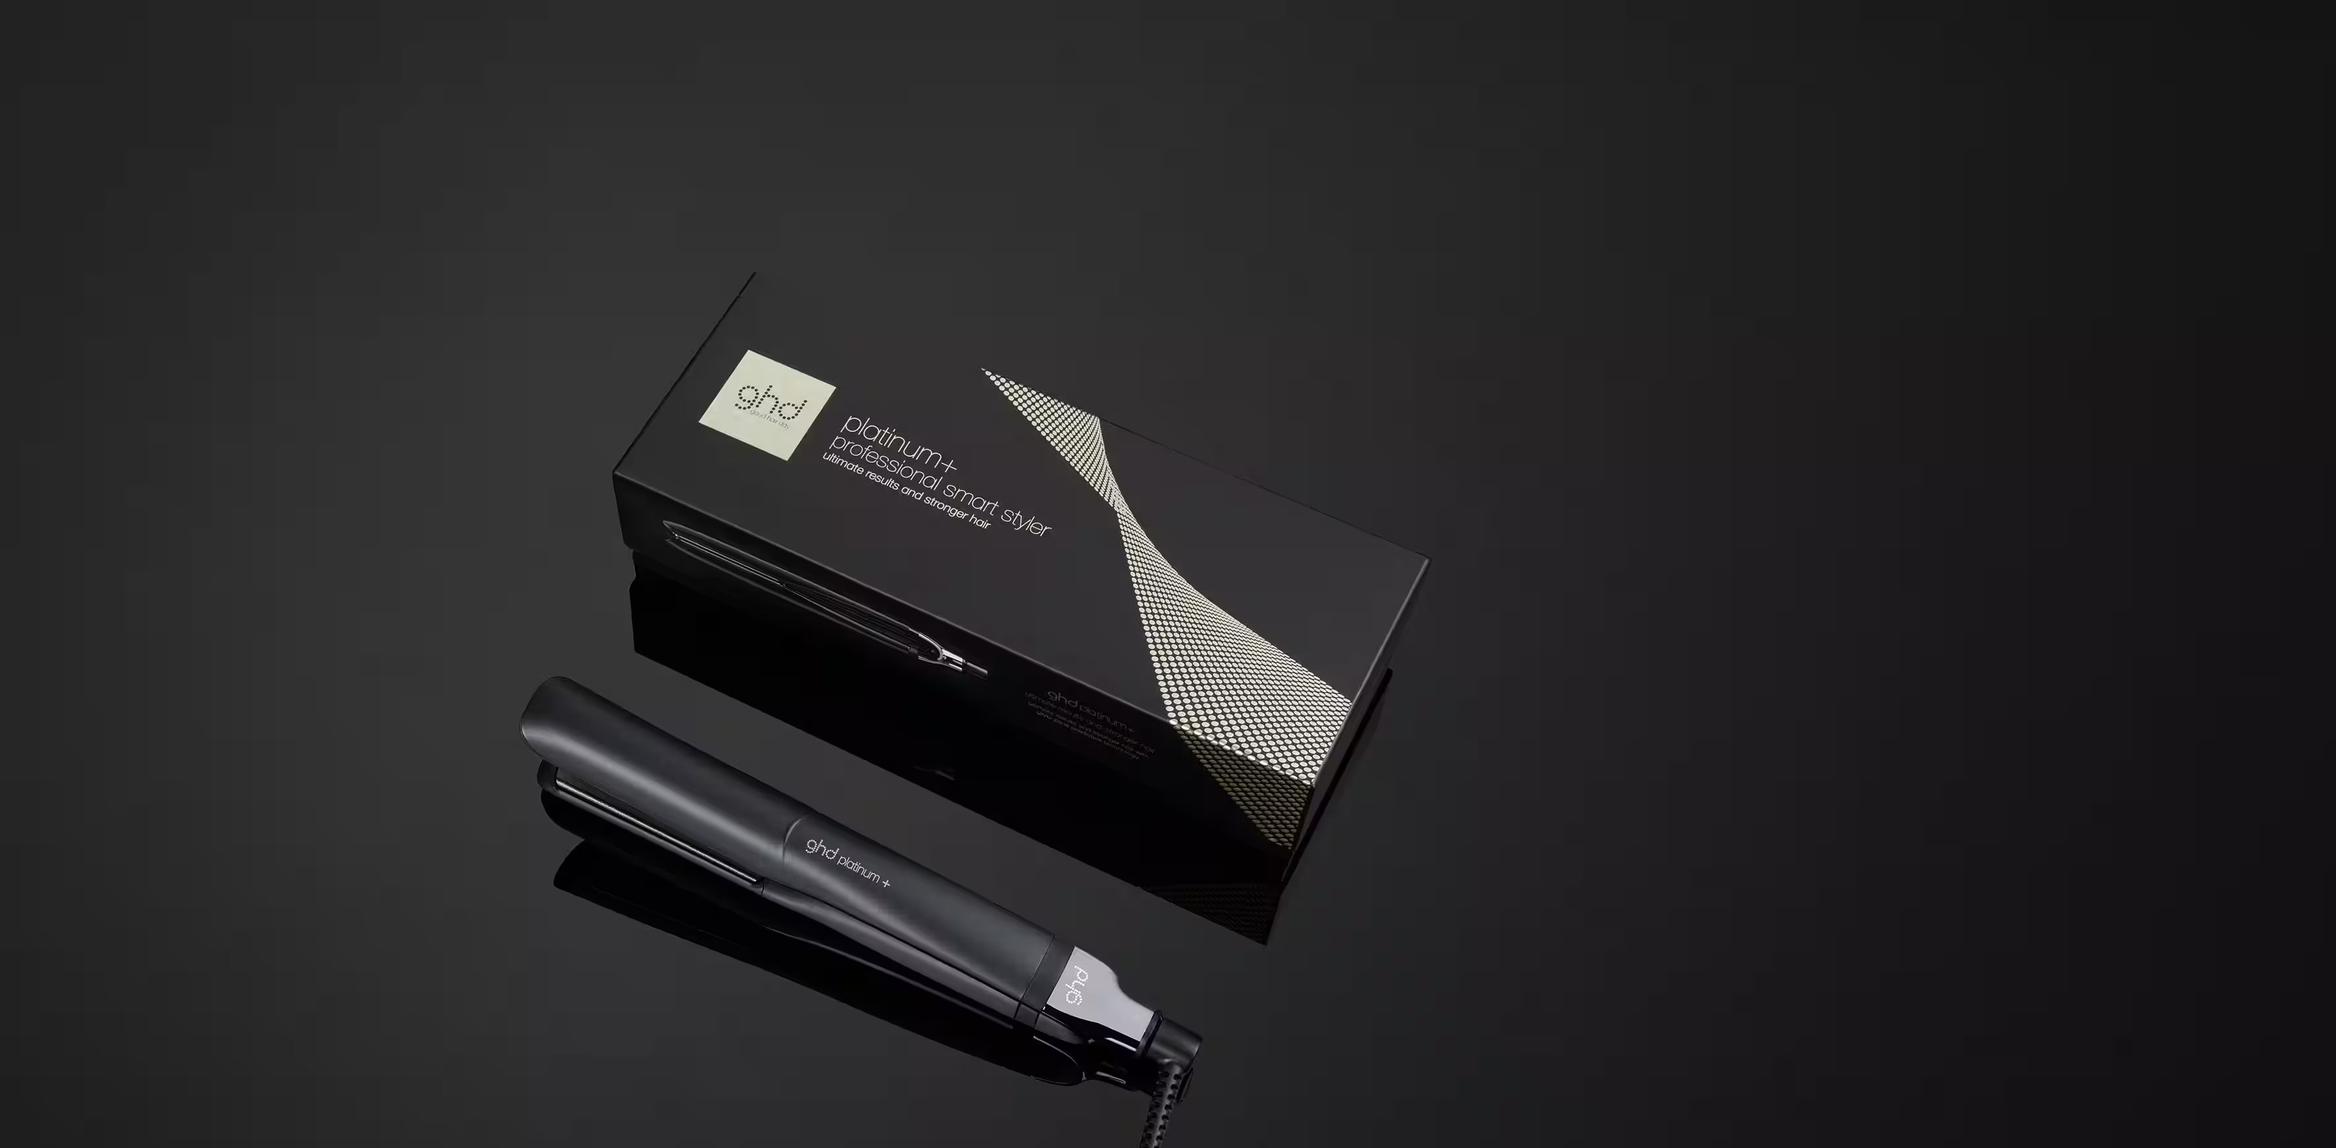  GHD PLATINUM+ HAIR STRAIGHTENER IN BLACK  offers at $316 in ghd